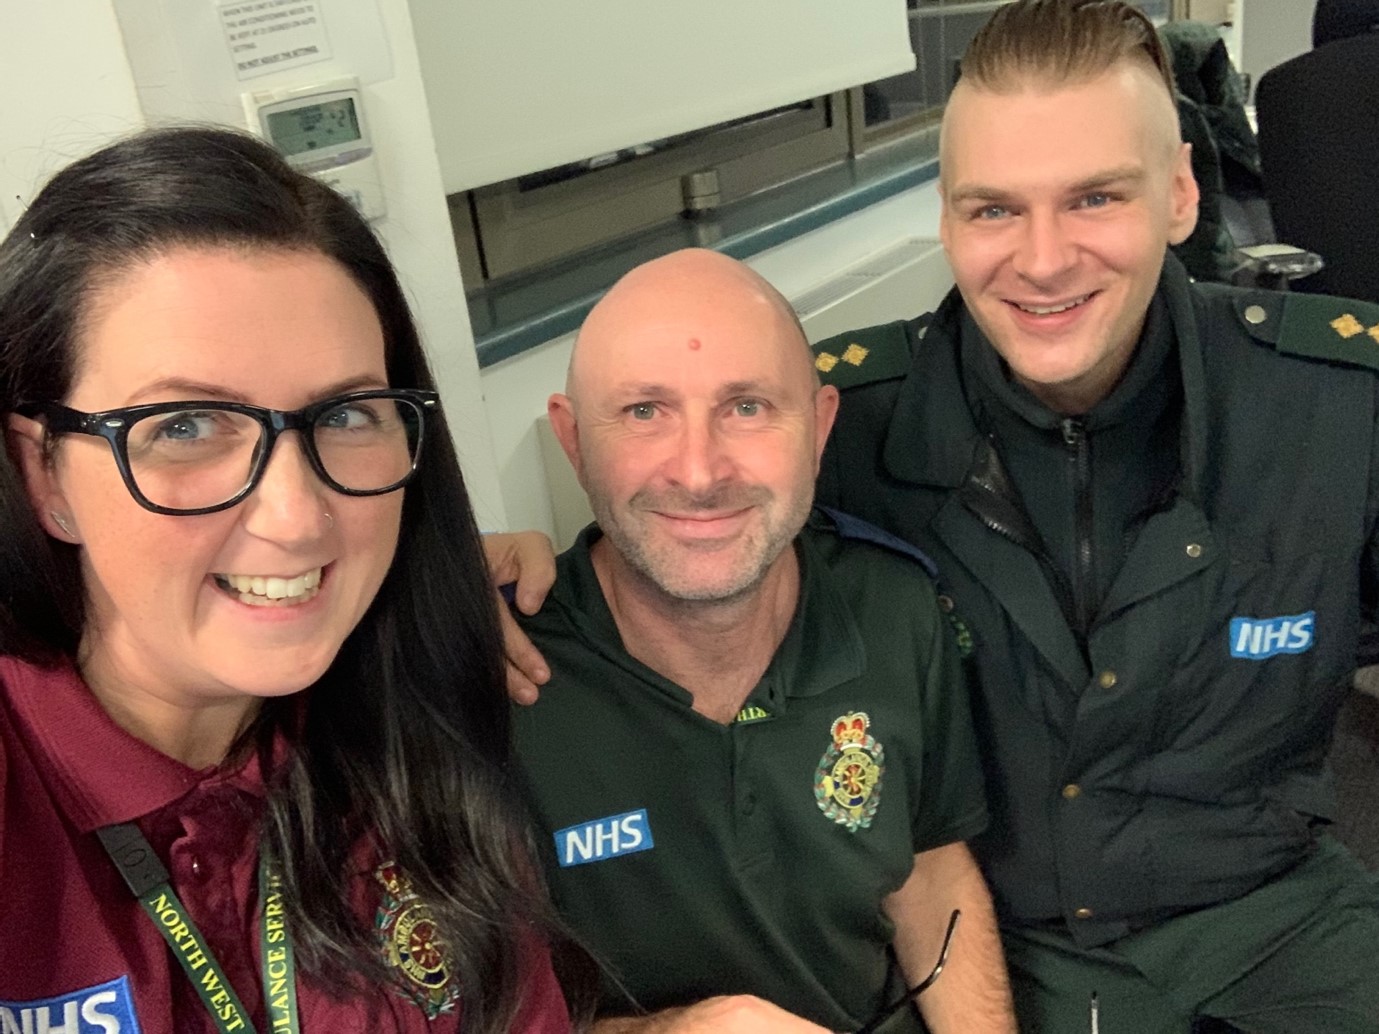 Lyndsey Rosson with colleagues from the ambulance service